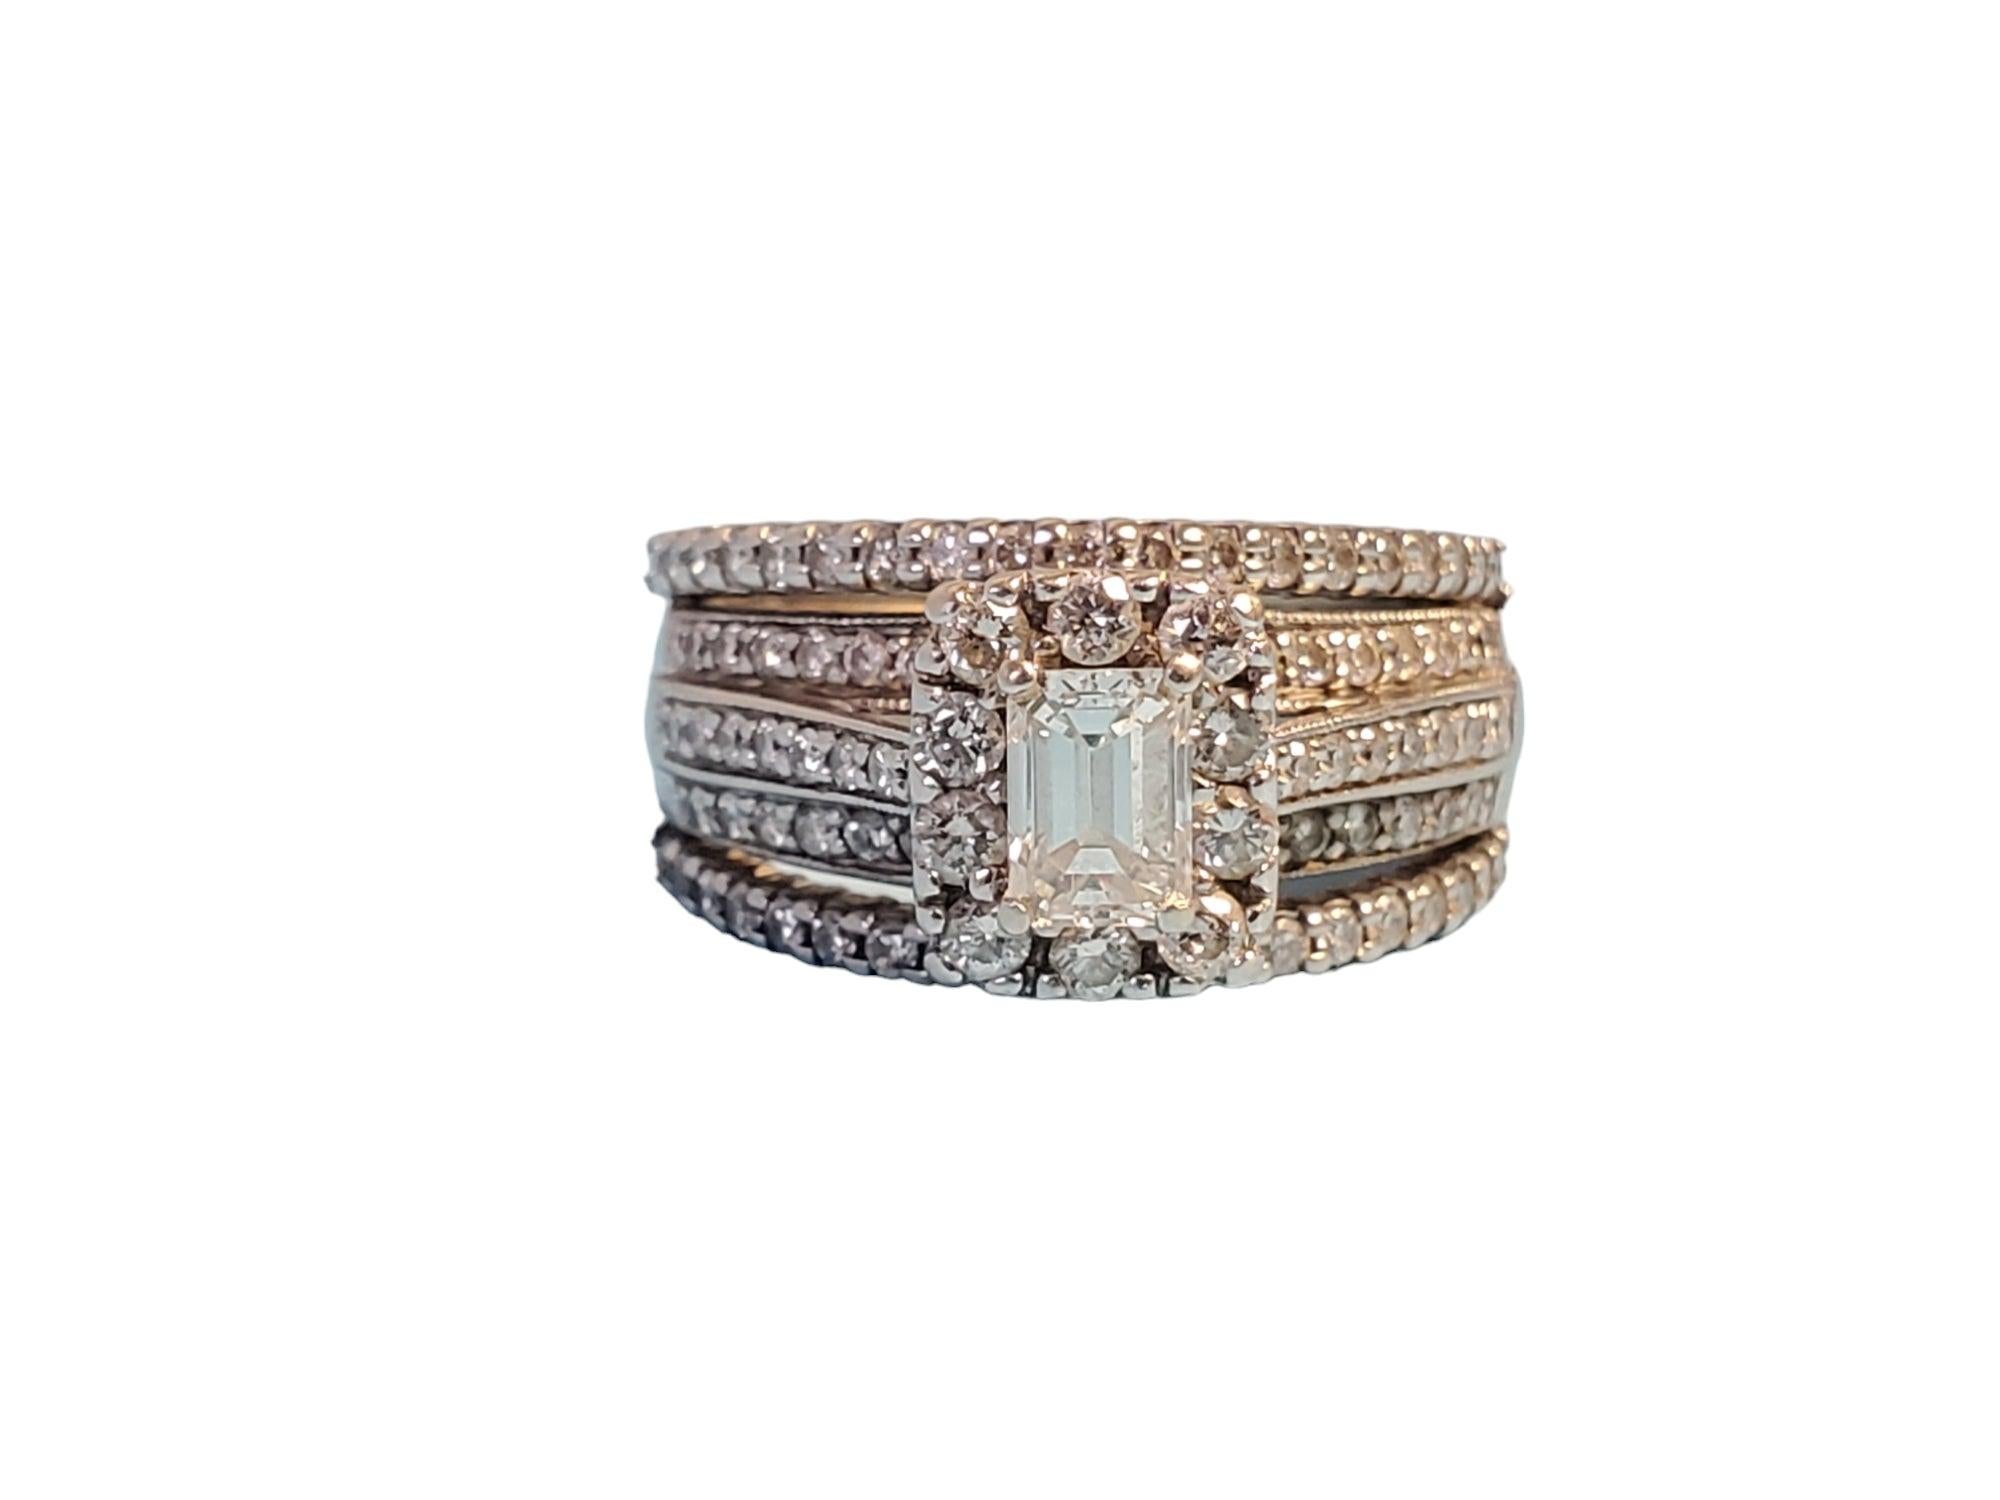 Estate 14k white gold diamond ring with 1tcw white GH VS-SI round brilliant diamonds and .33ct emerald cut center stone. This diamond ring is a size 6. Would make a great engagement, wedding ring or right hand diamond ring. weight is 6.4g